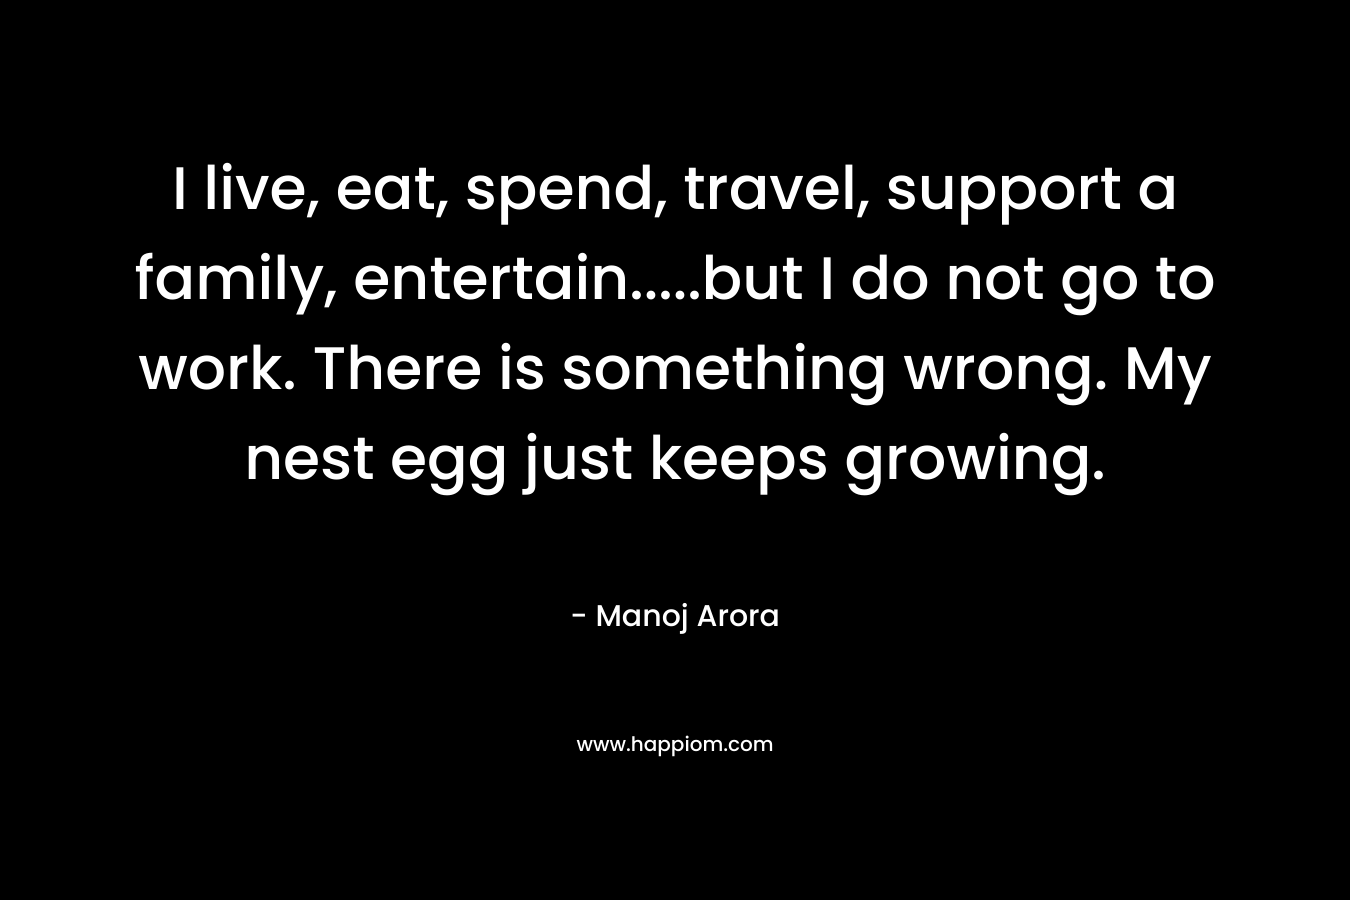 I live, eat, spend, travel, support a family, entertain.....but I do not go to work. There is something wrong. My nest egg just keeps growing.